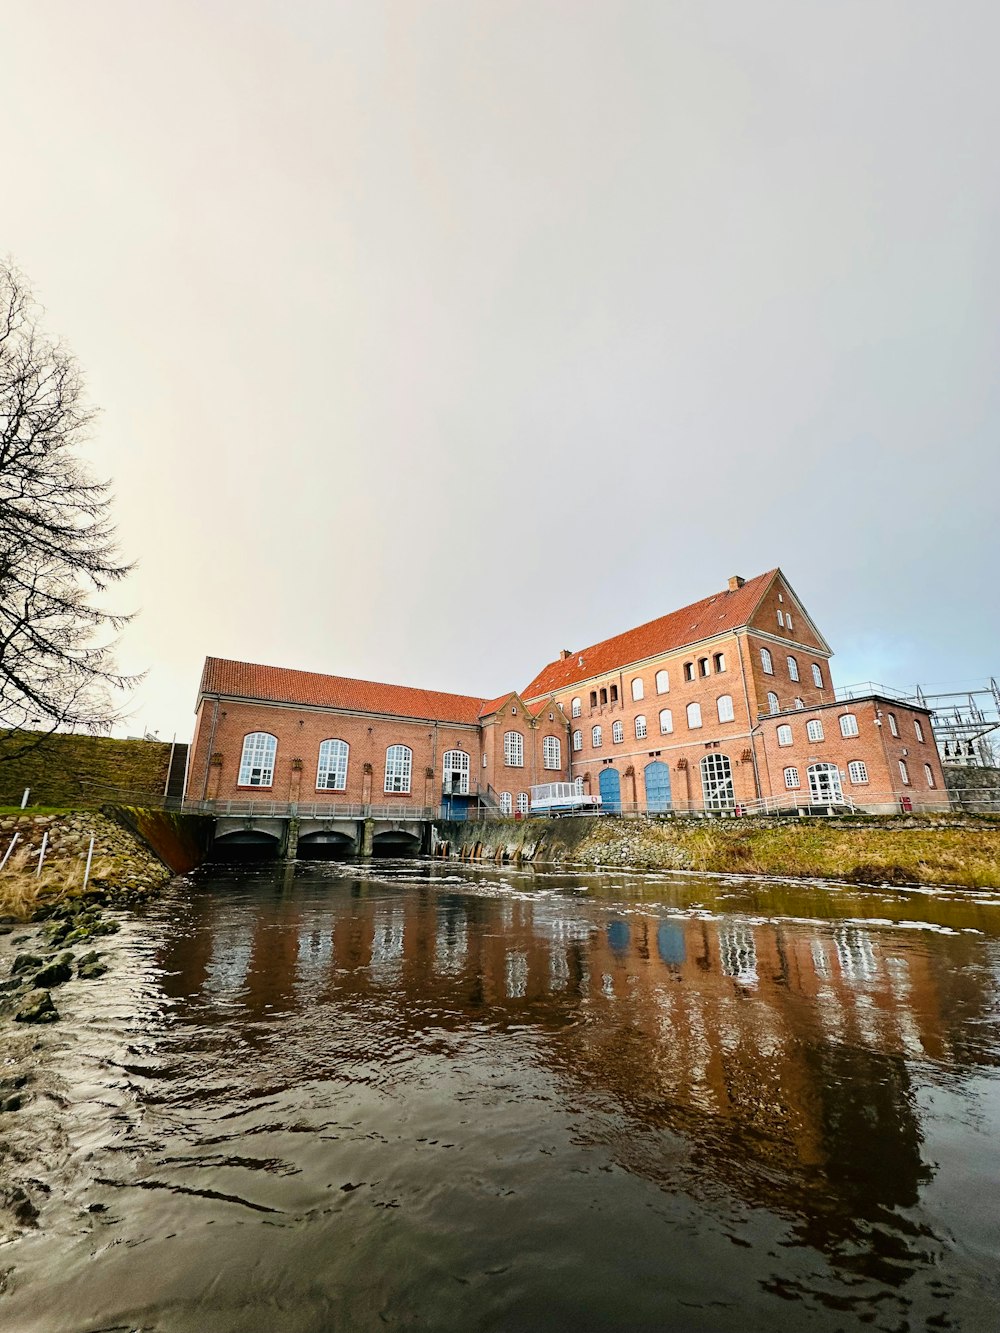 a large brick building sitting next to a river